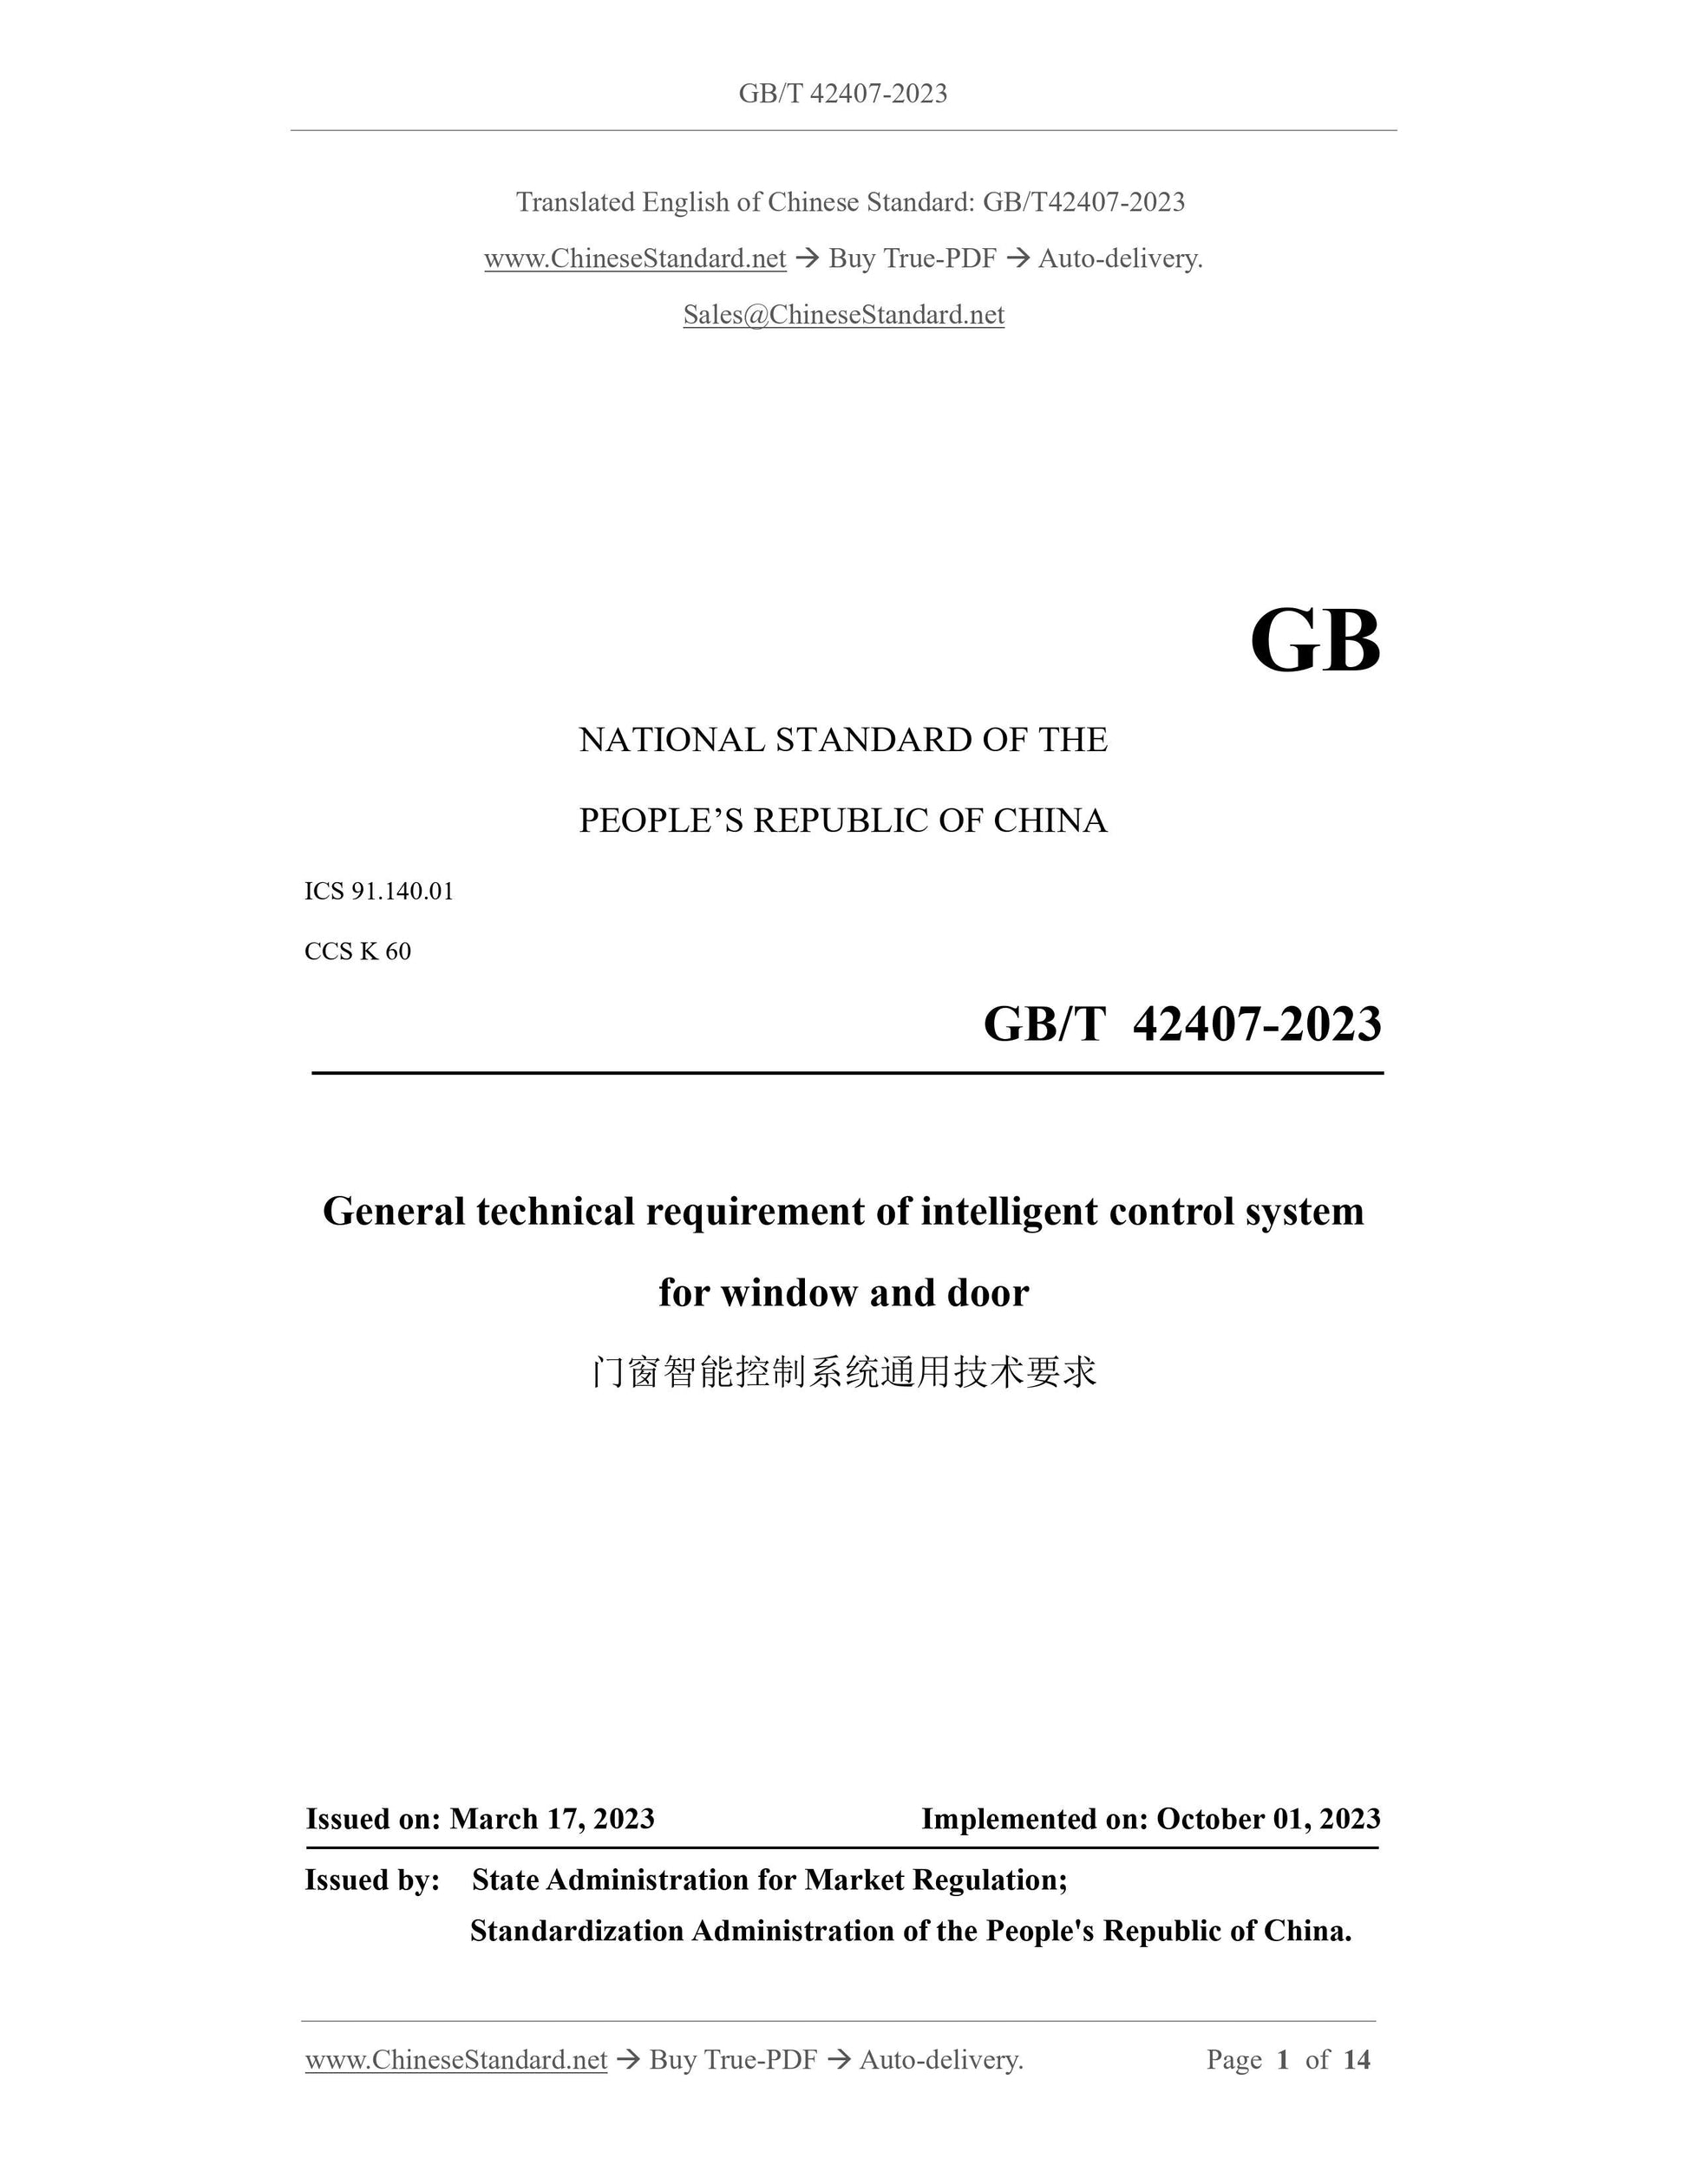 GB/T 42407-2023 Page 1